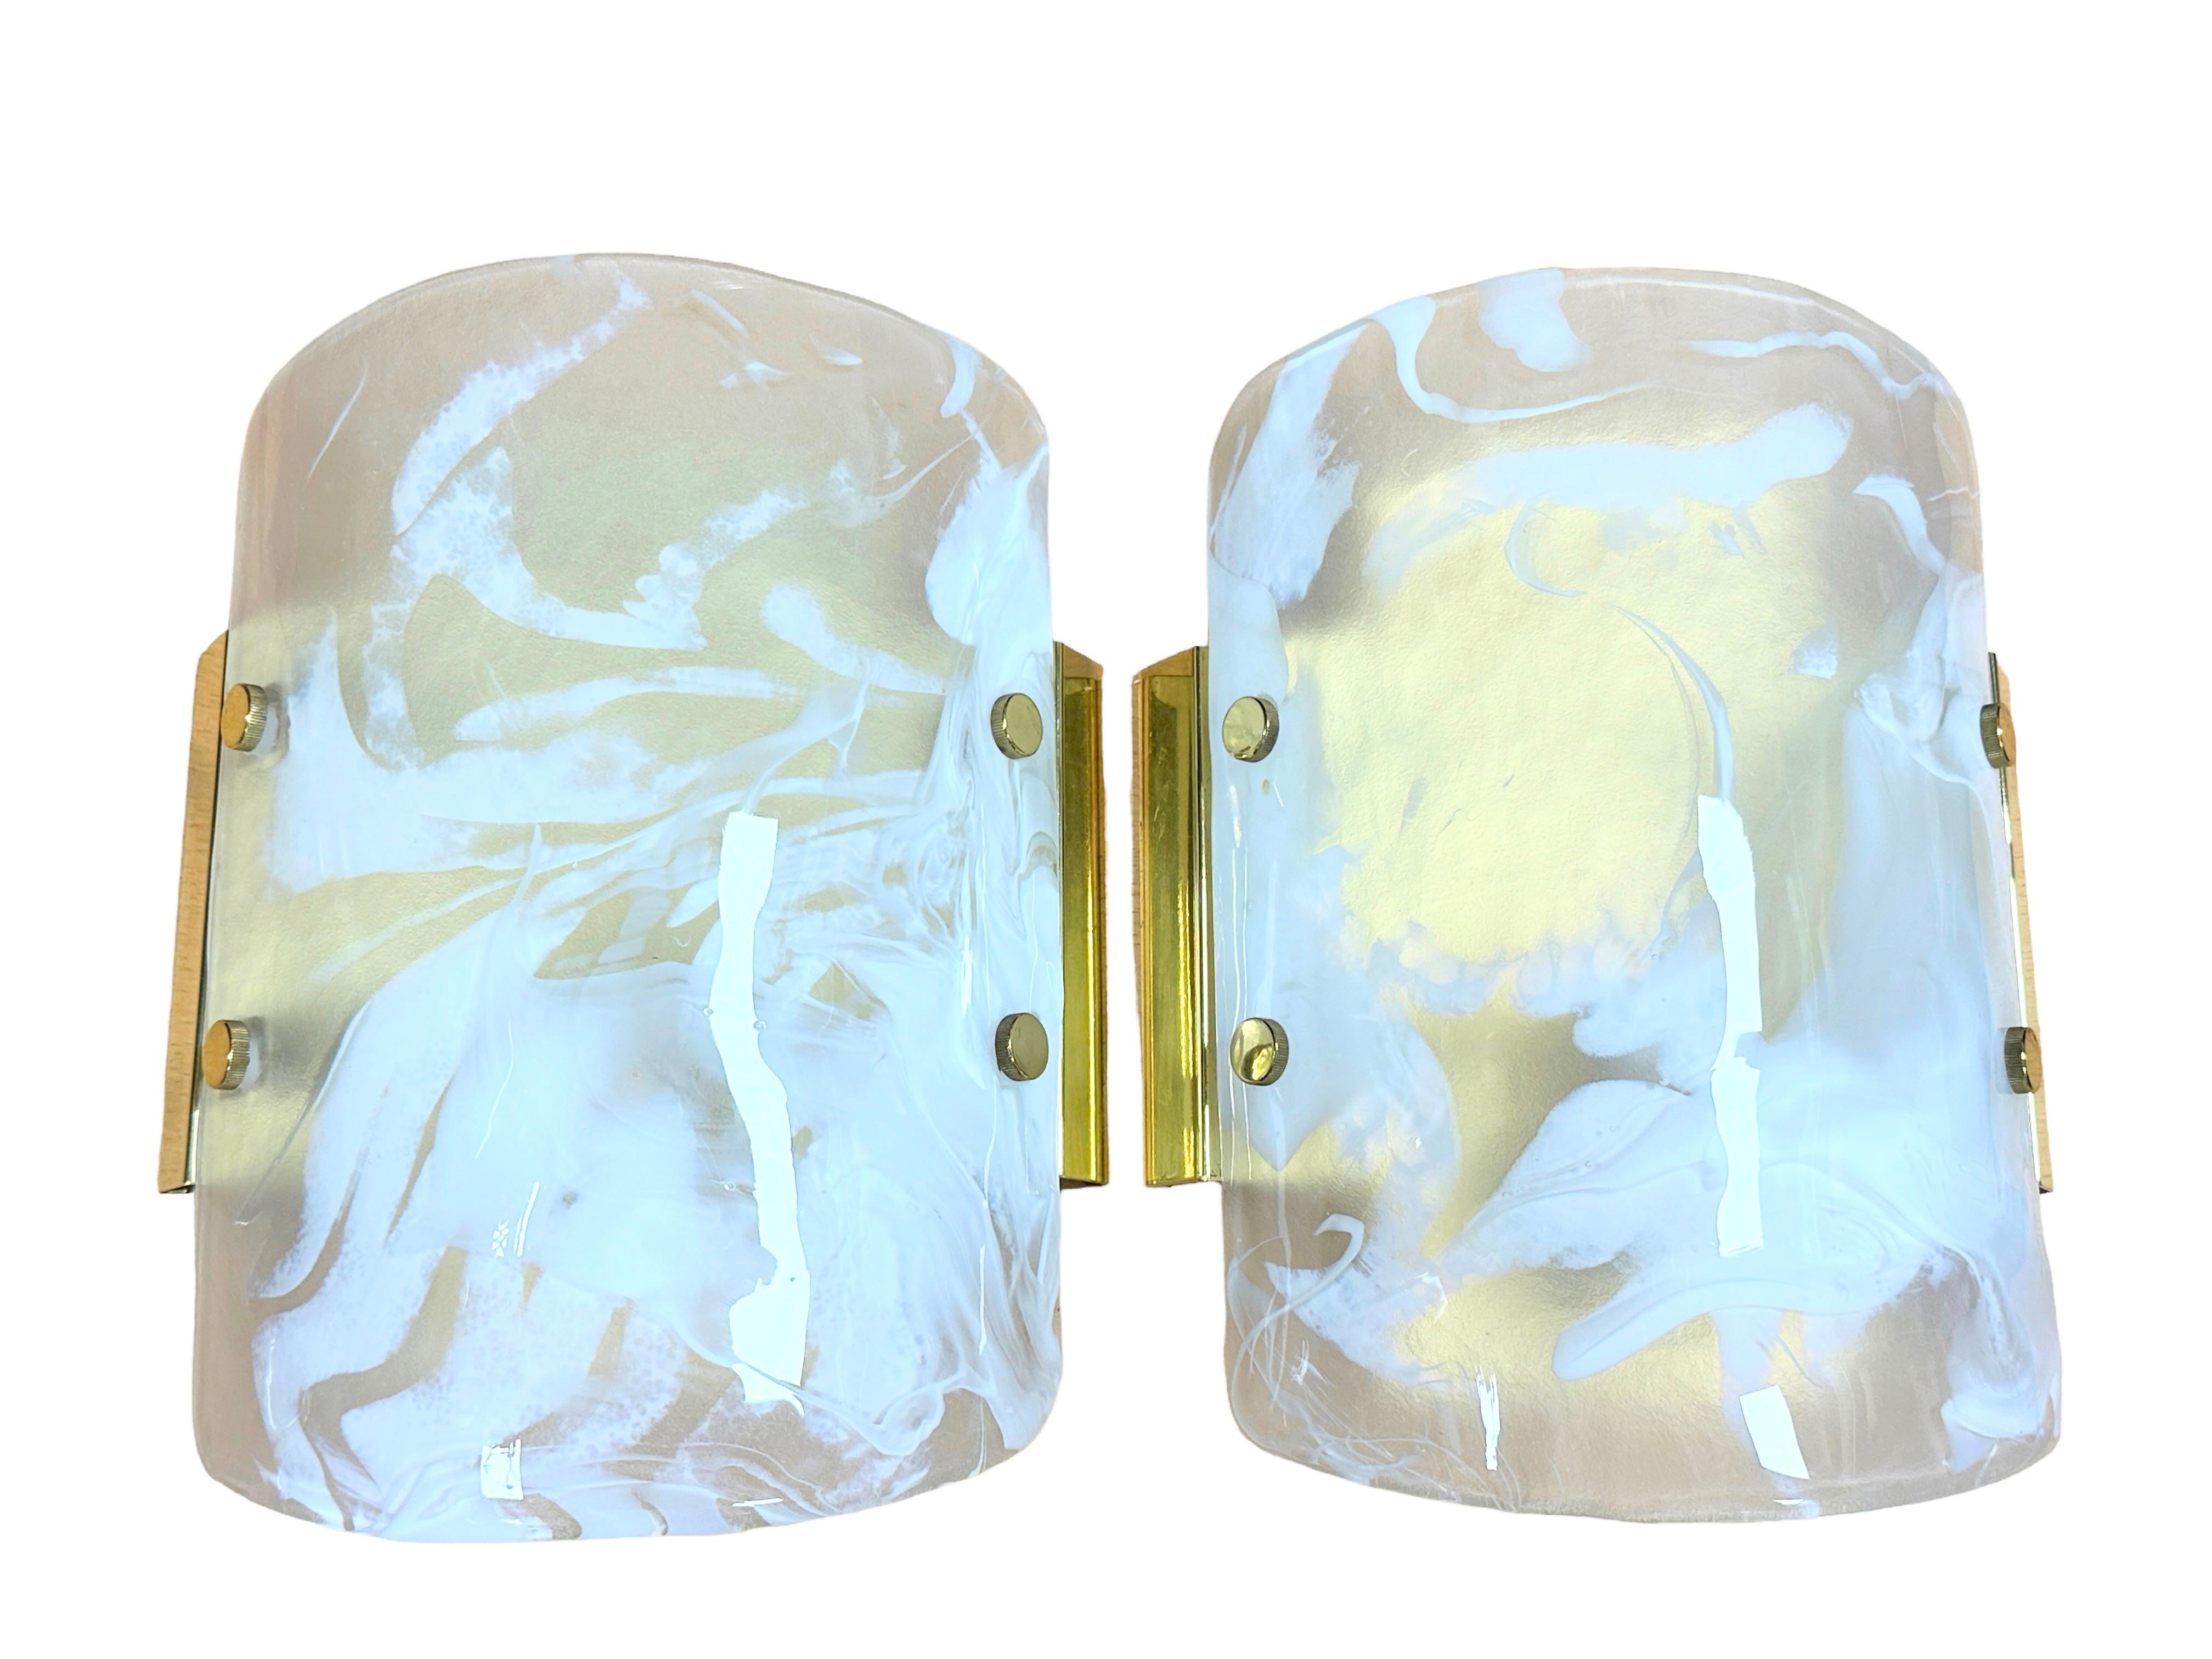 A pair of wall lights by manufacturer Hillebrand Leuchten, Germany. Original modernist German wall light from the 1970s in high quality glass in an marble shape glass. This extremely rare pair of wall lights was manufactured by Hillebrand Leuchten